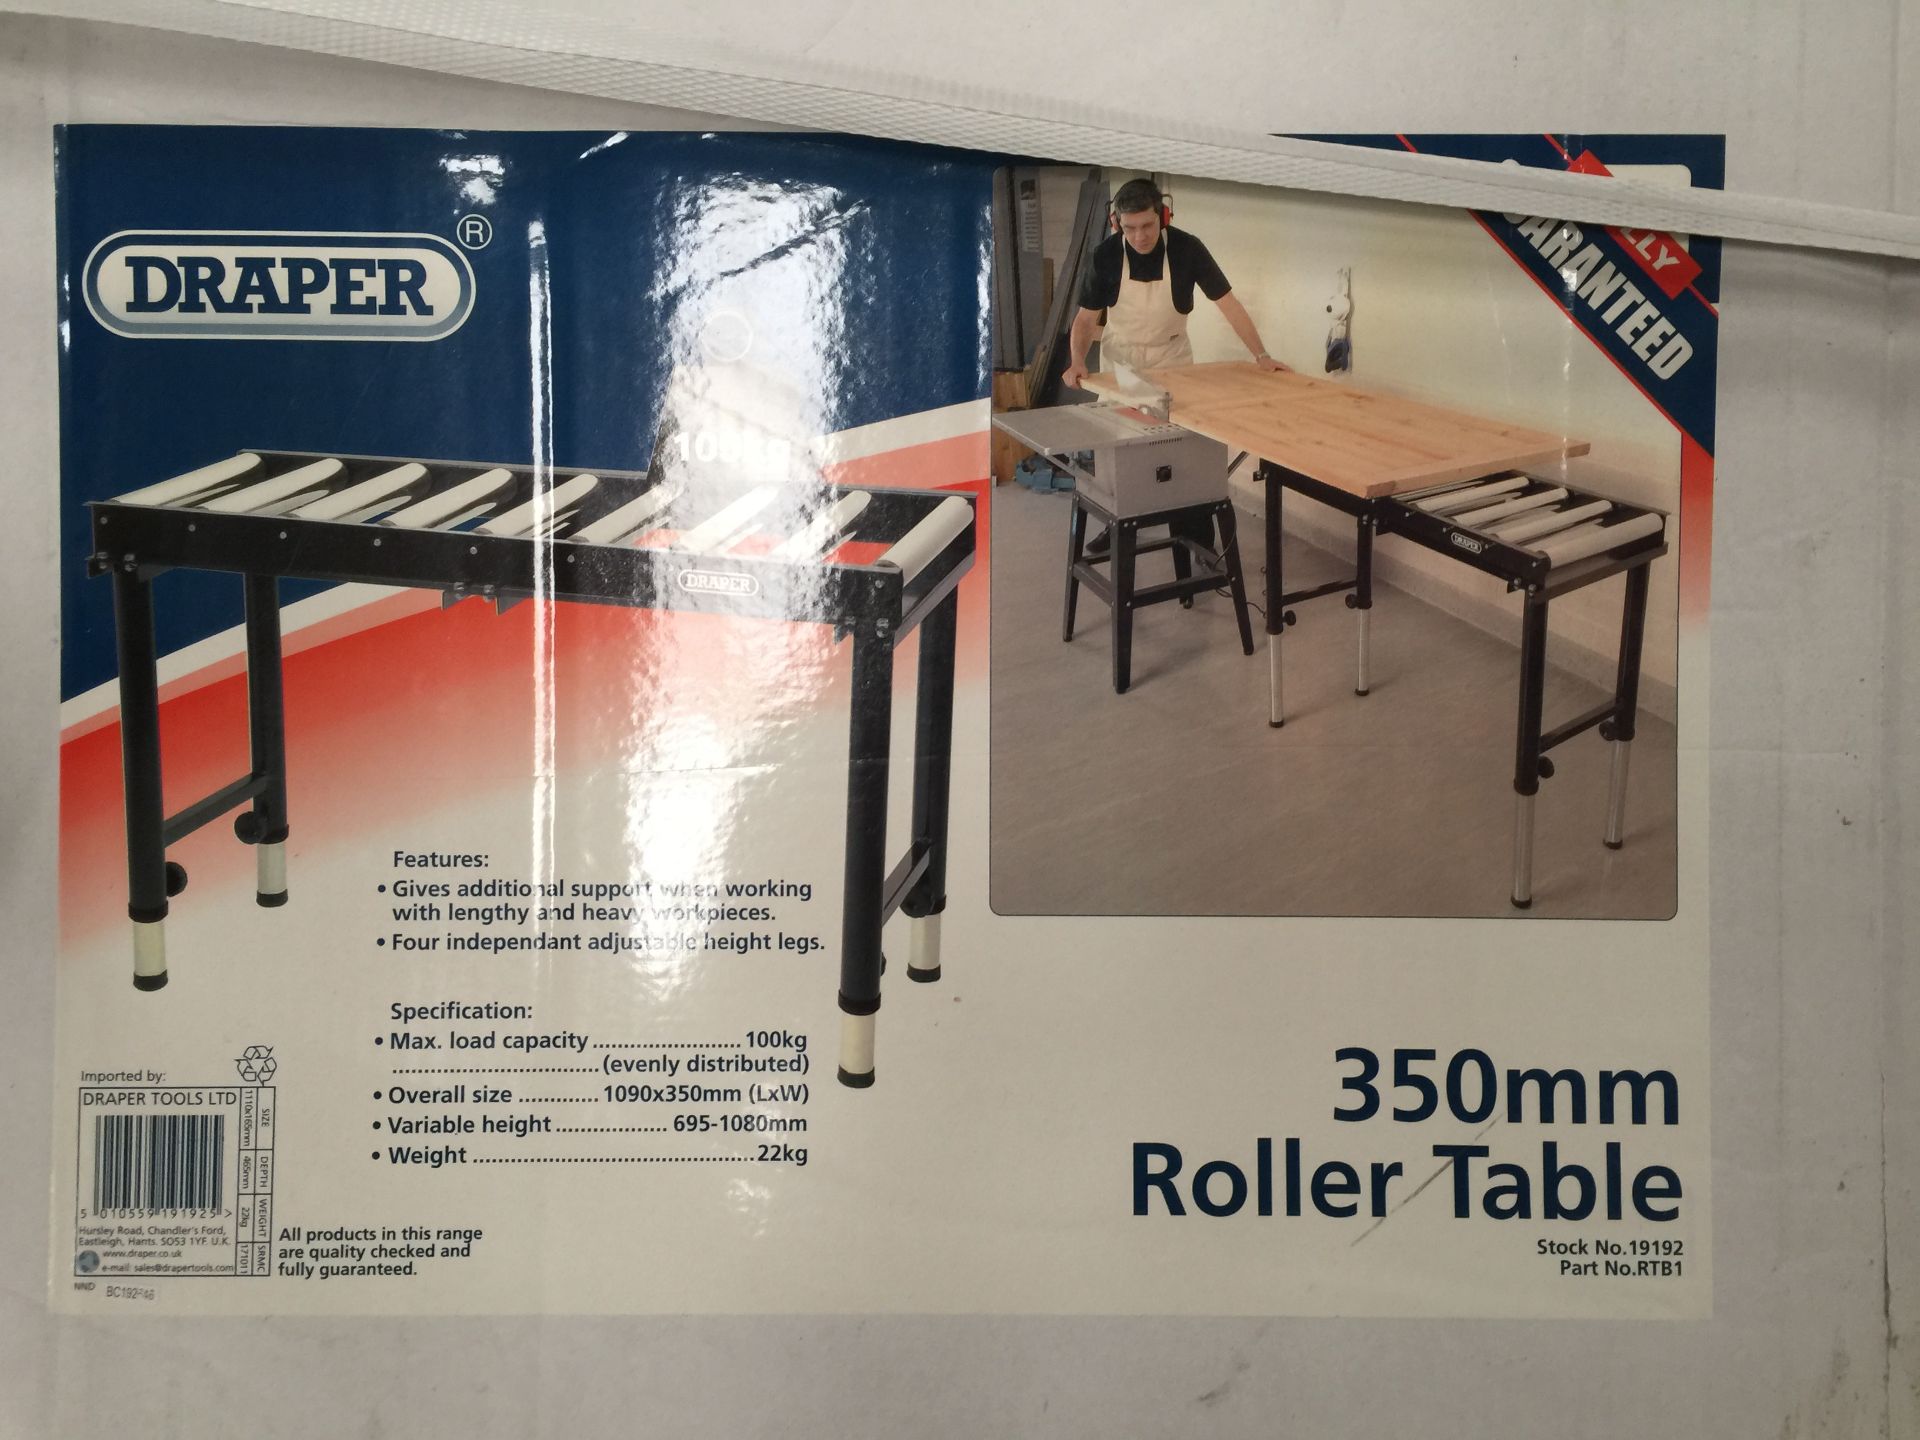 Draper Roller Tables x 2 | Size: 35mm | 1 new in box - Image 7 of 8